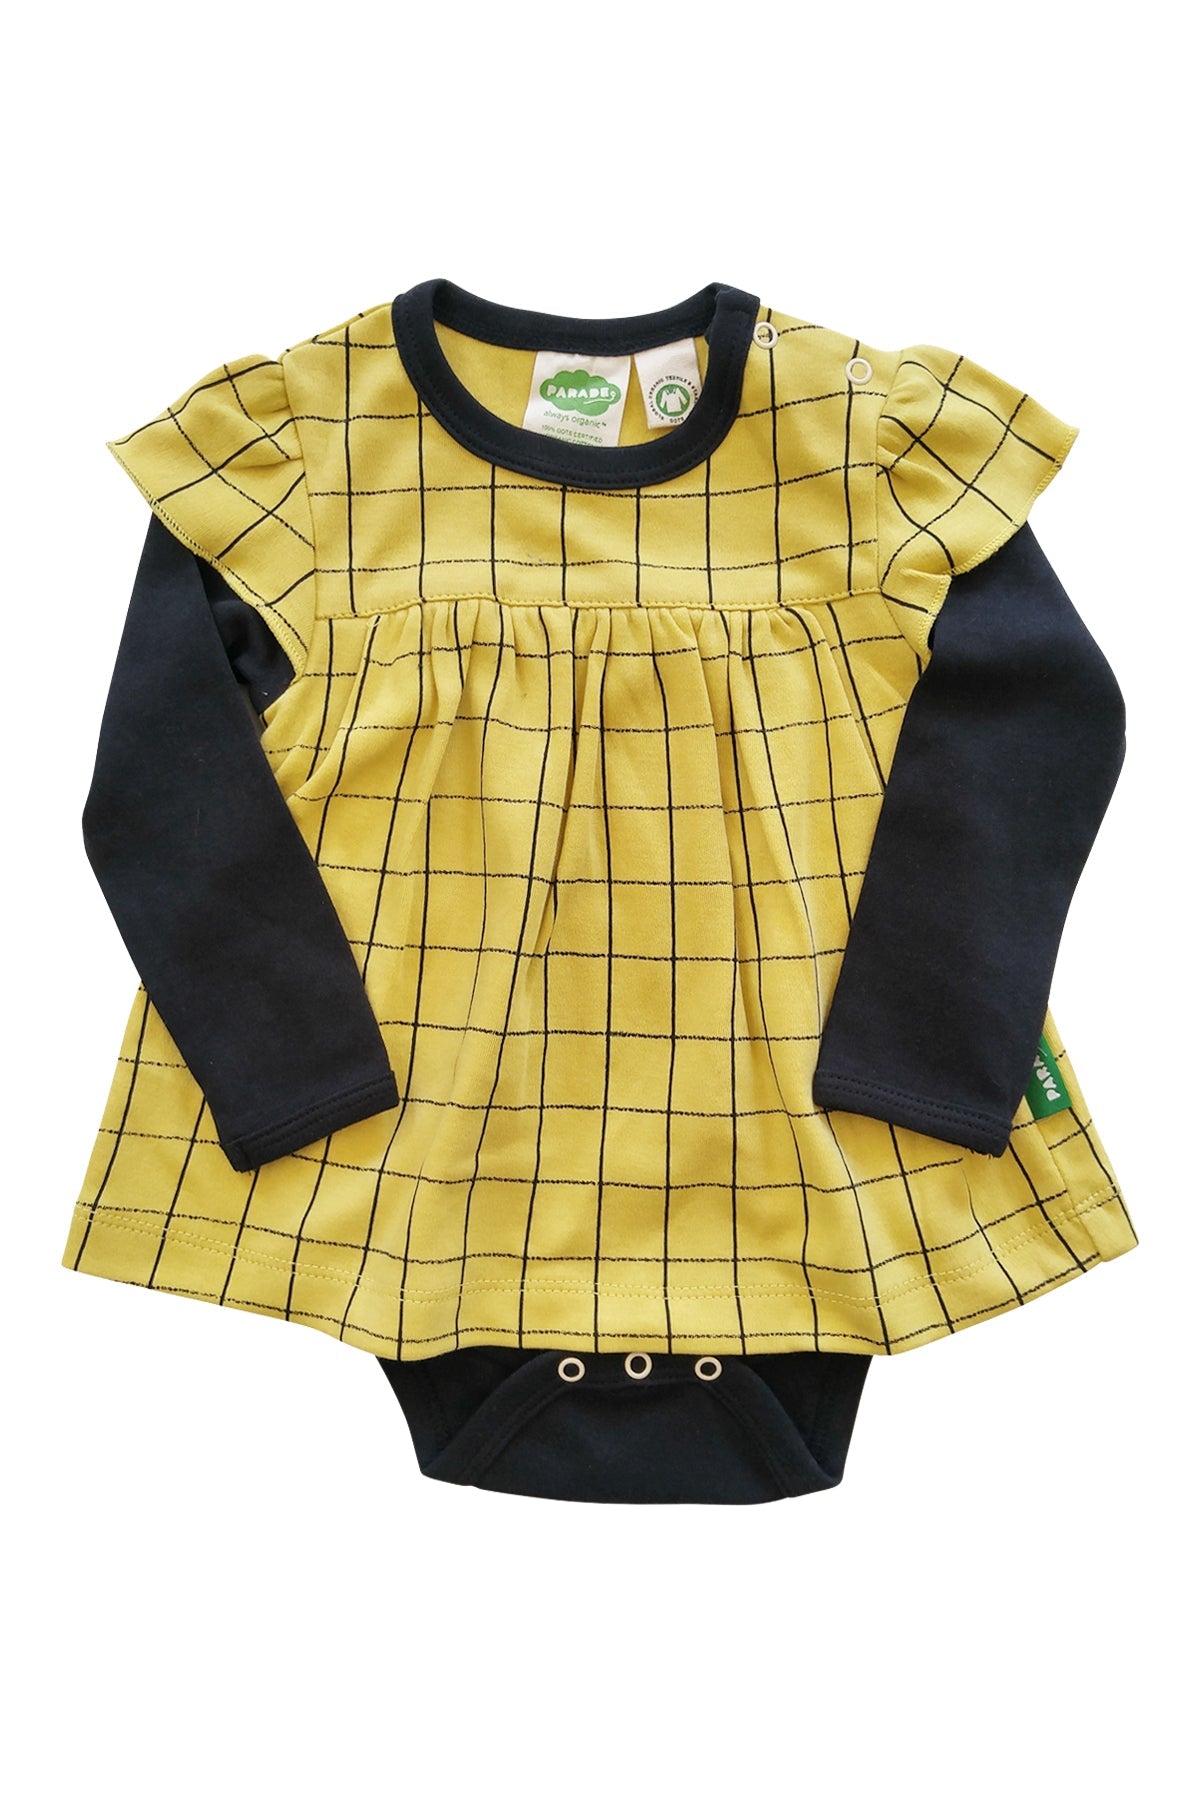 Onesie Dress - Long Sleeve - Organic Baby Clothes, Kids Clothes, & Gifts | Parade Organics